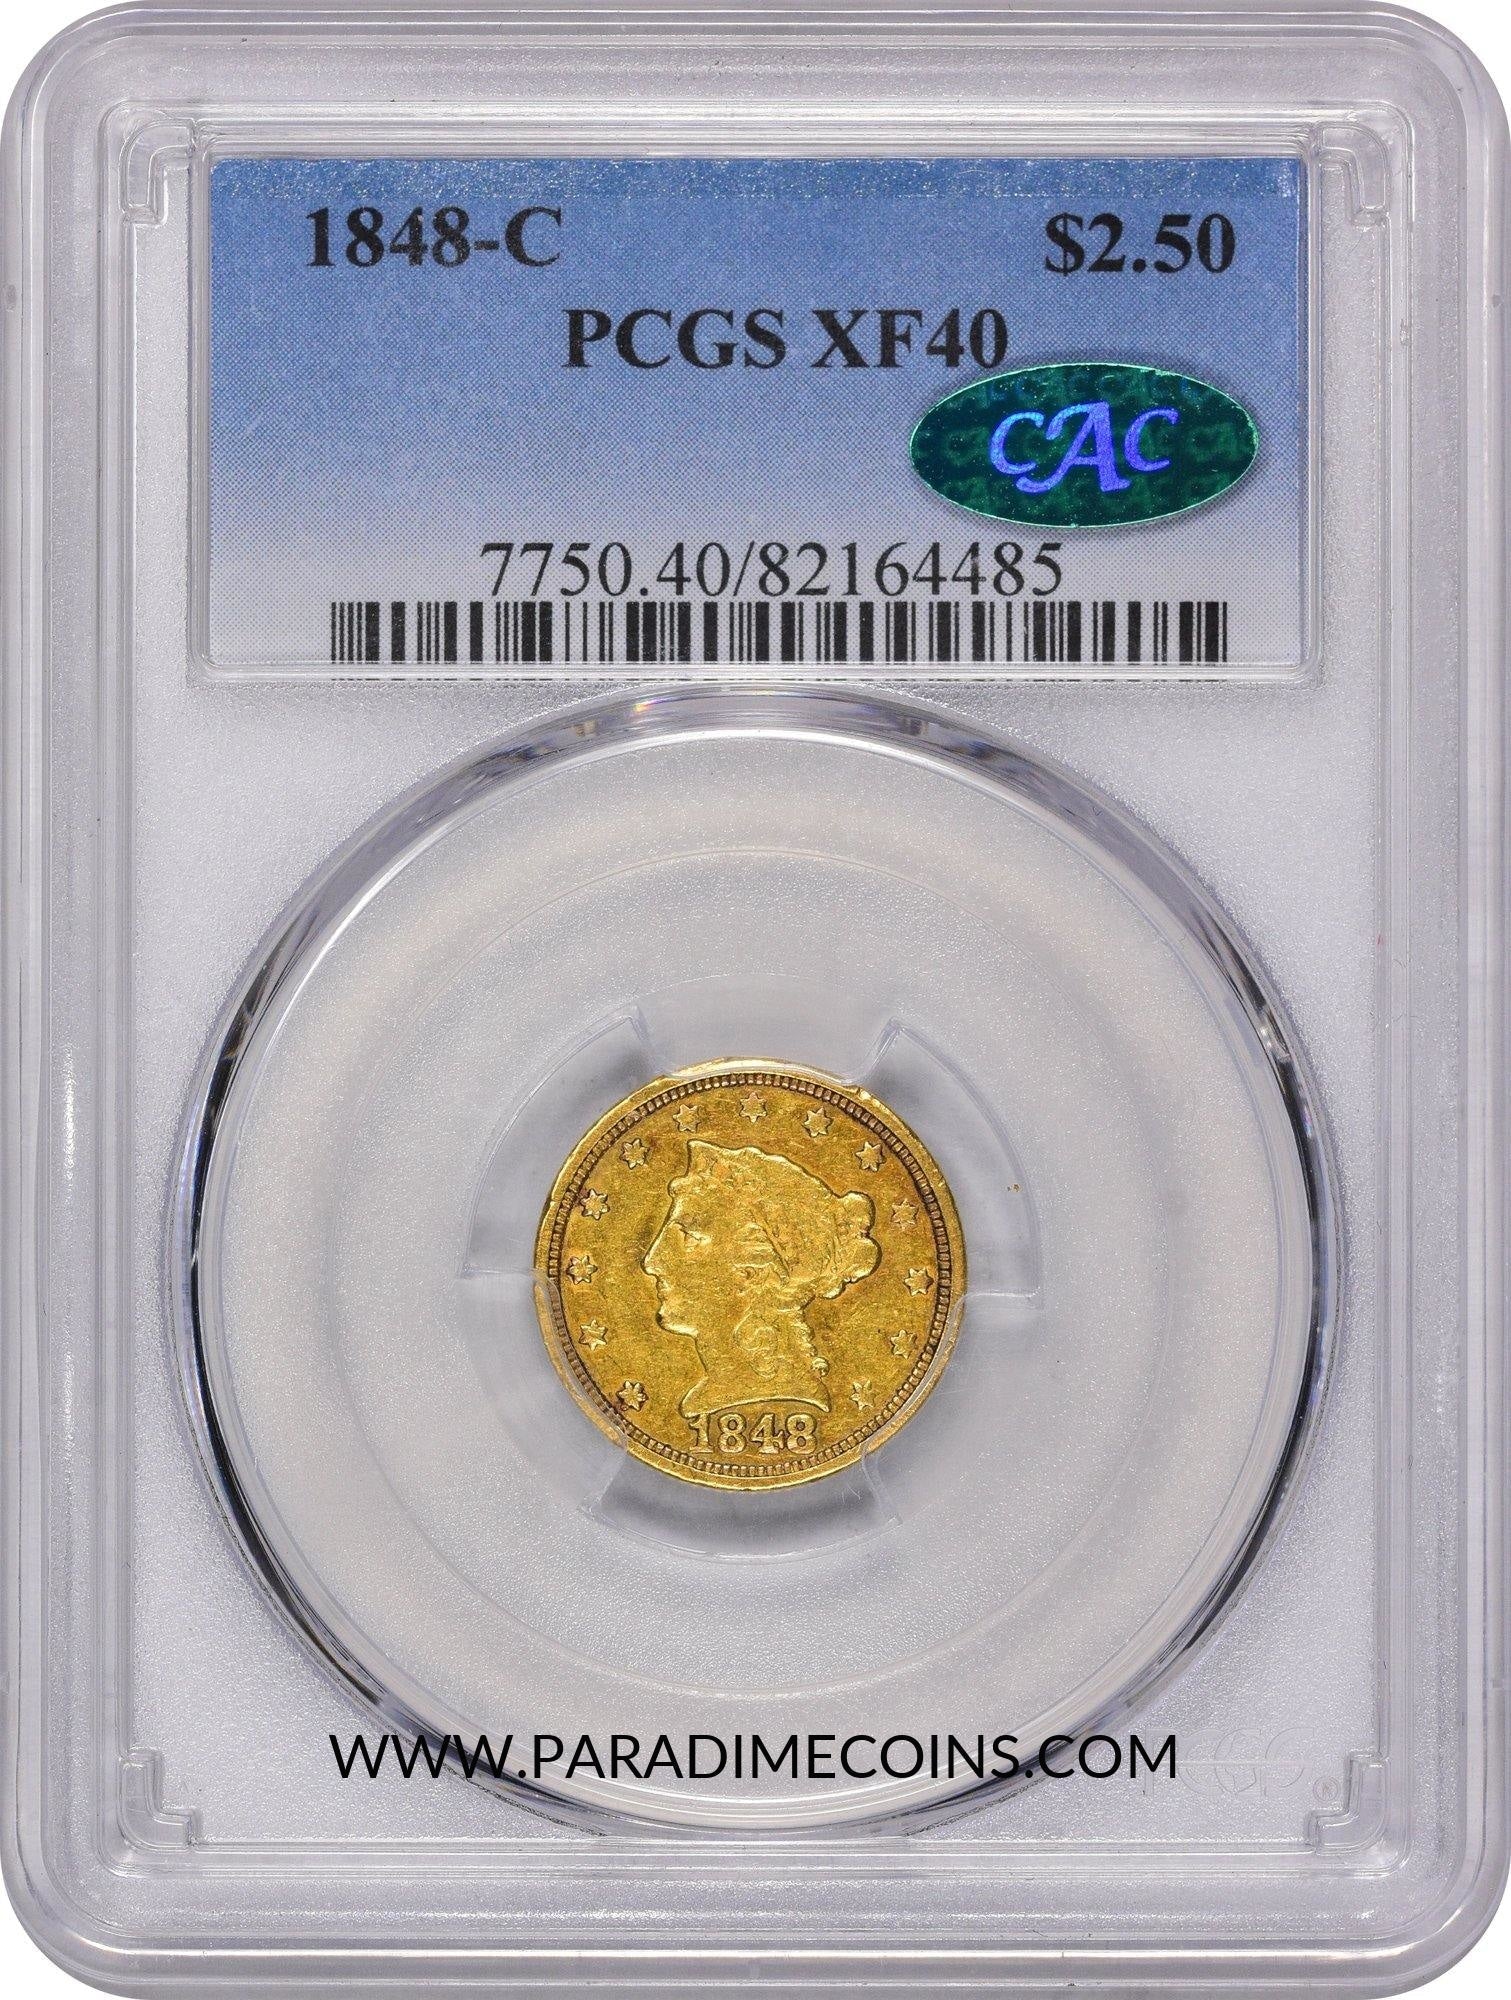 1848-C $2.5 XF40 PCGS CAC - Paradime Coins | PCGS NGC CACG CAC Rare US Numismatic Coins For Sale